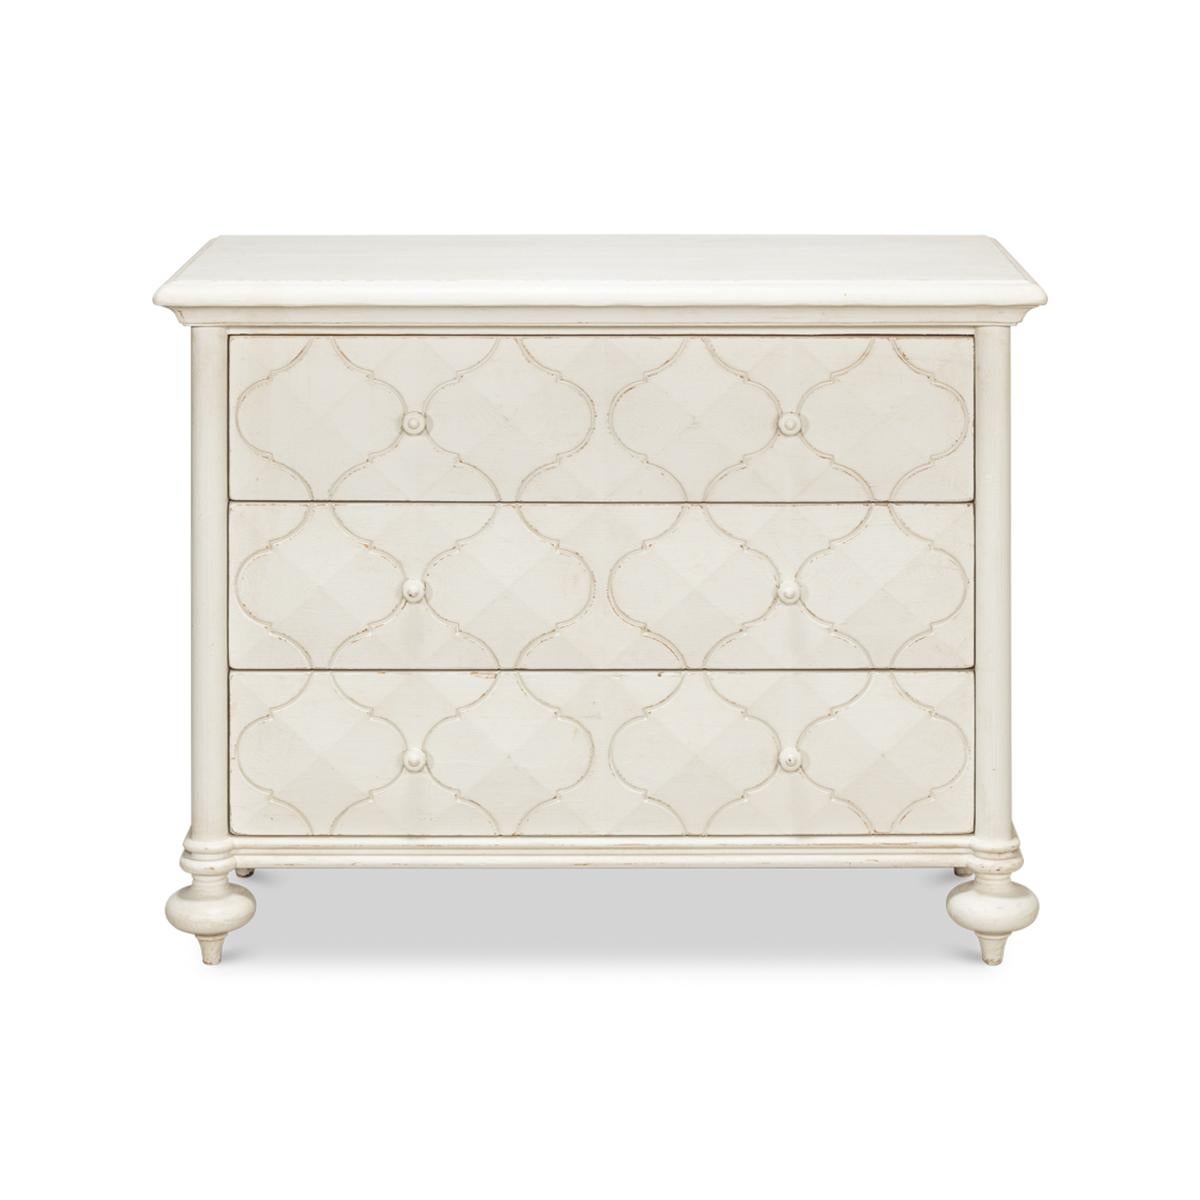 Pine wood painted three-drawer dresser in an antique white painted finish. With a rectangular molded edge raised on turned taupee feet.

Dimensions: 44